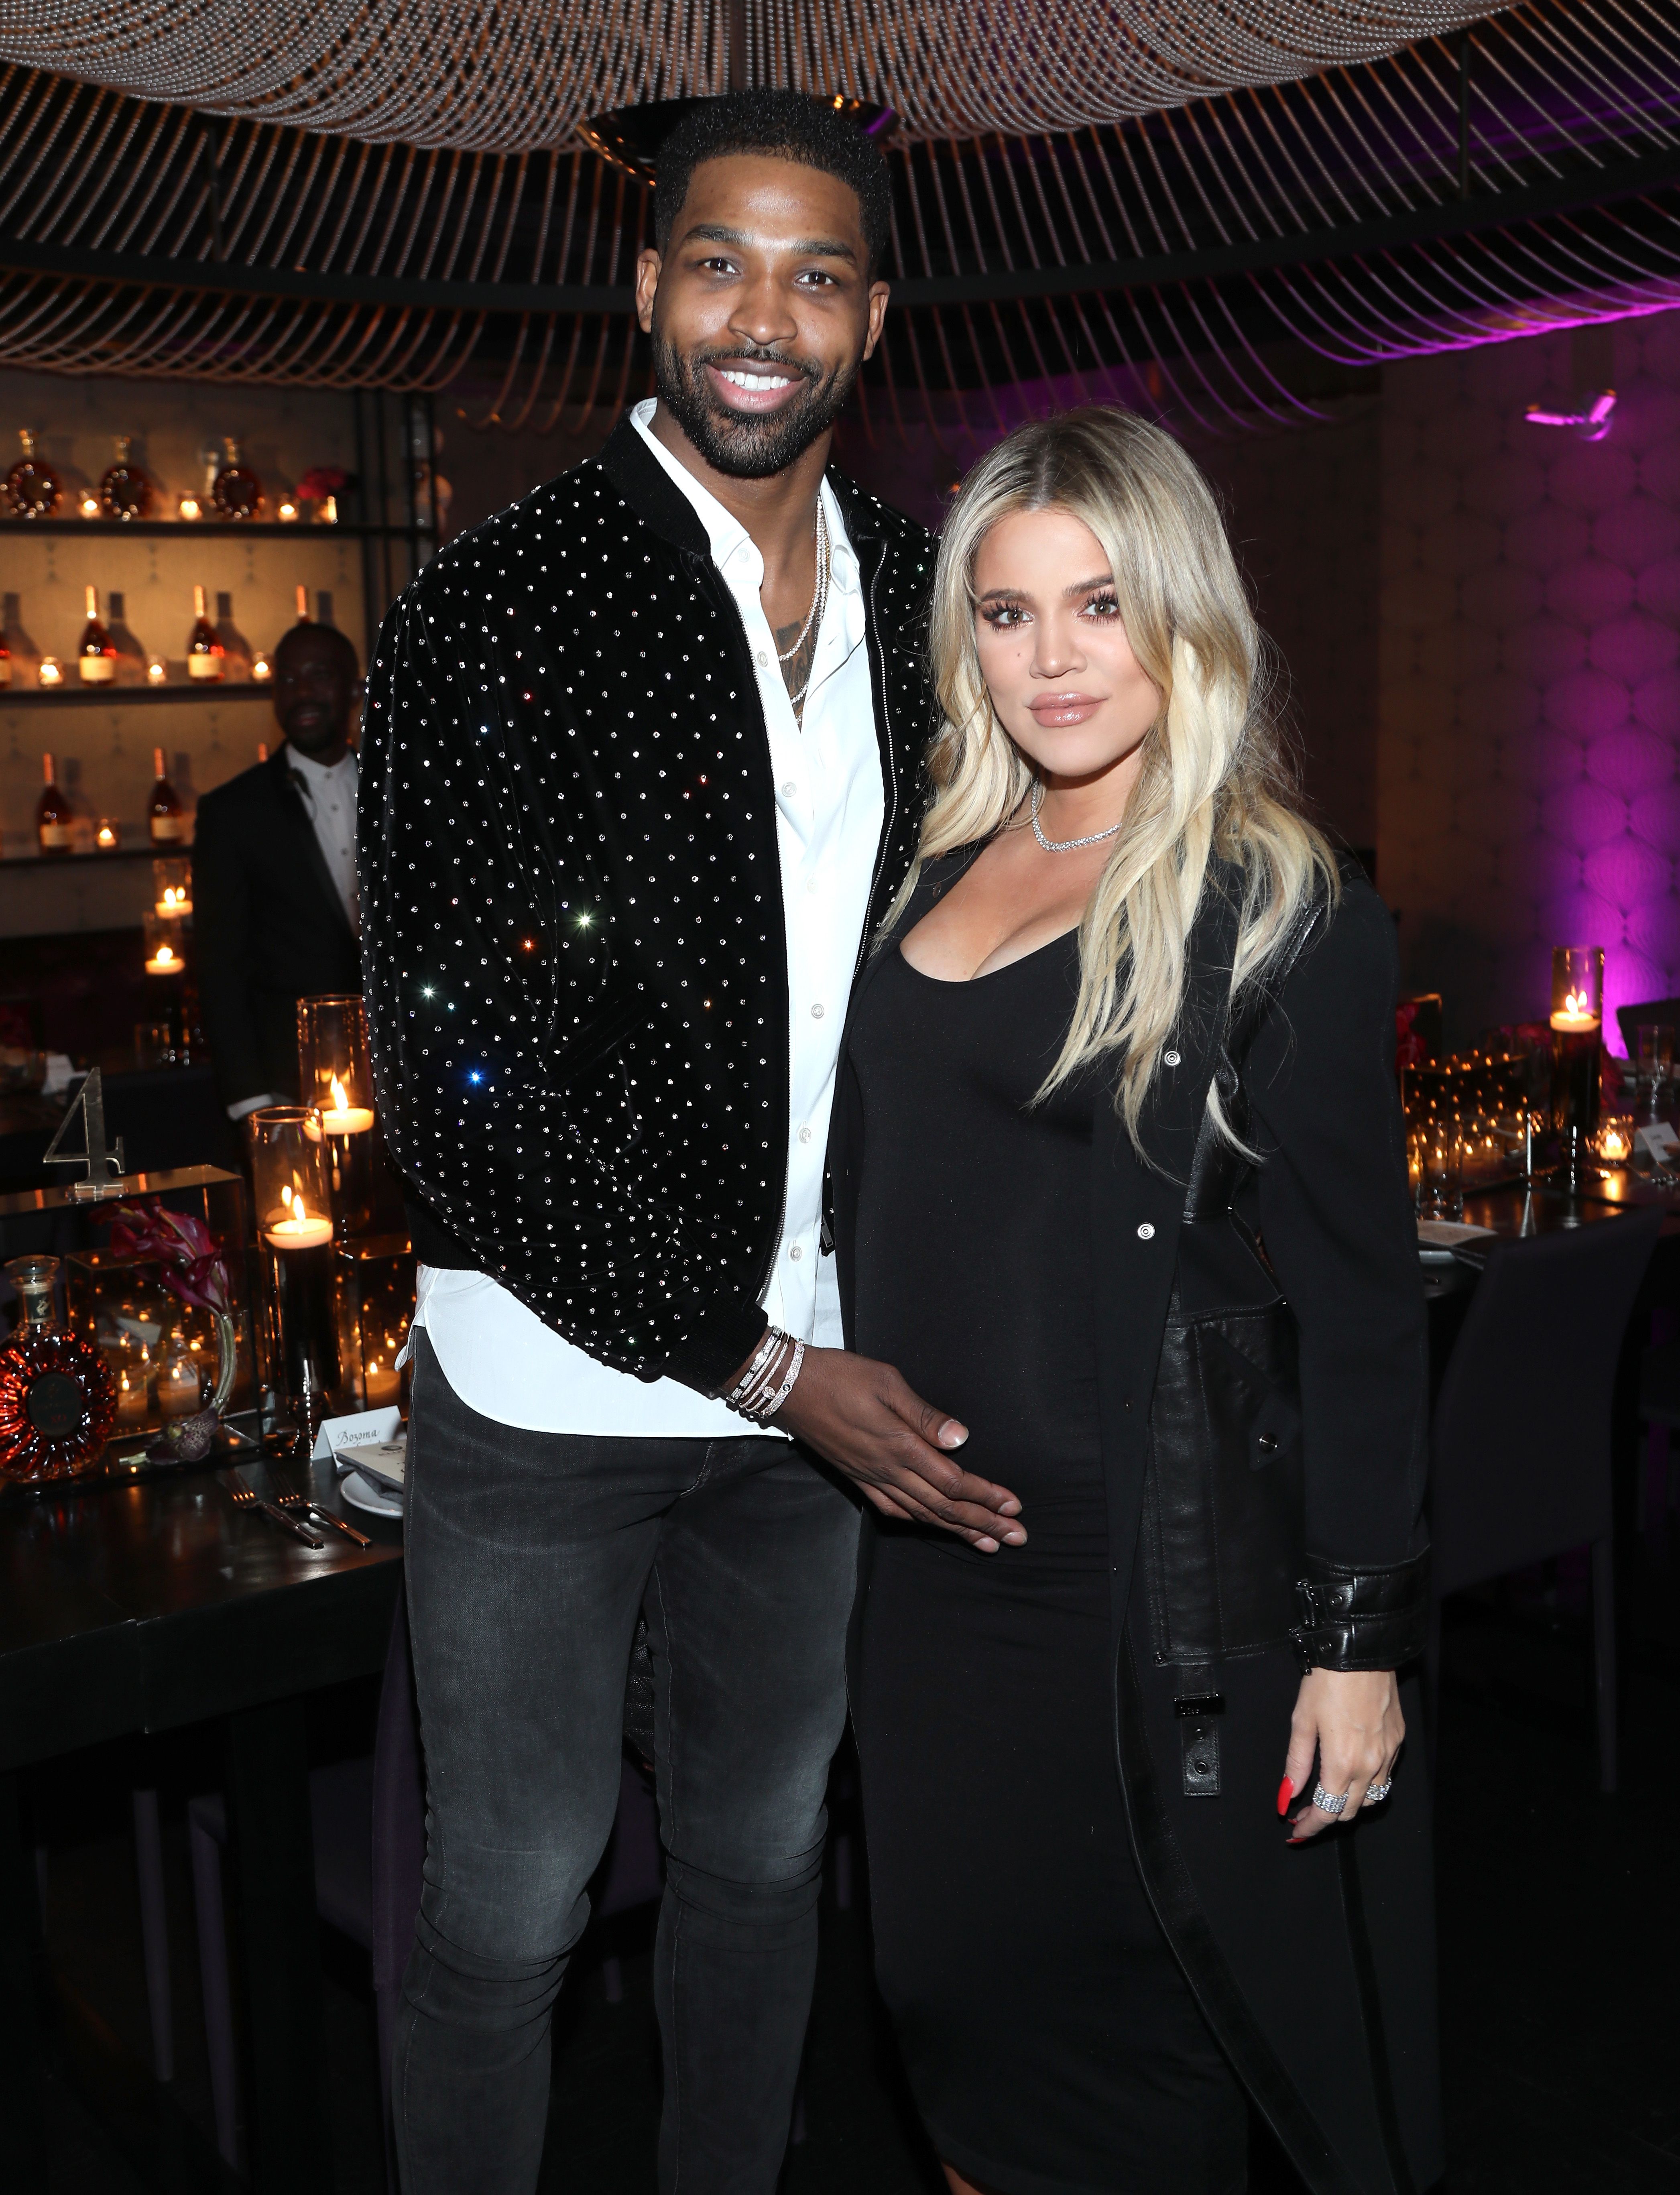 D'Angelo Russell parties with the Kardashians